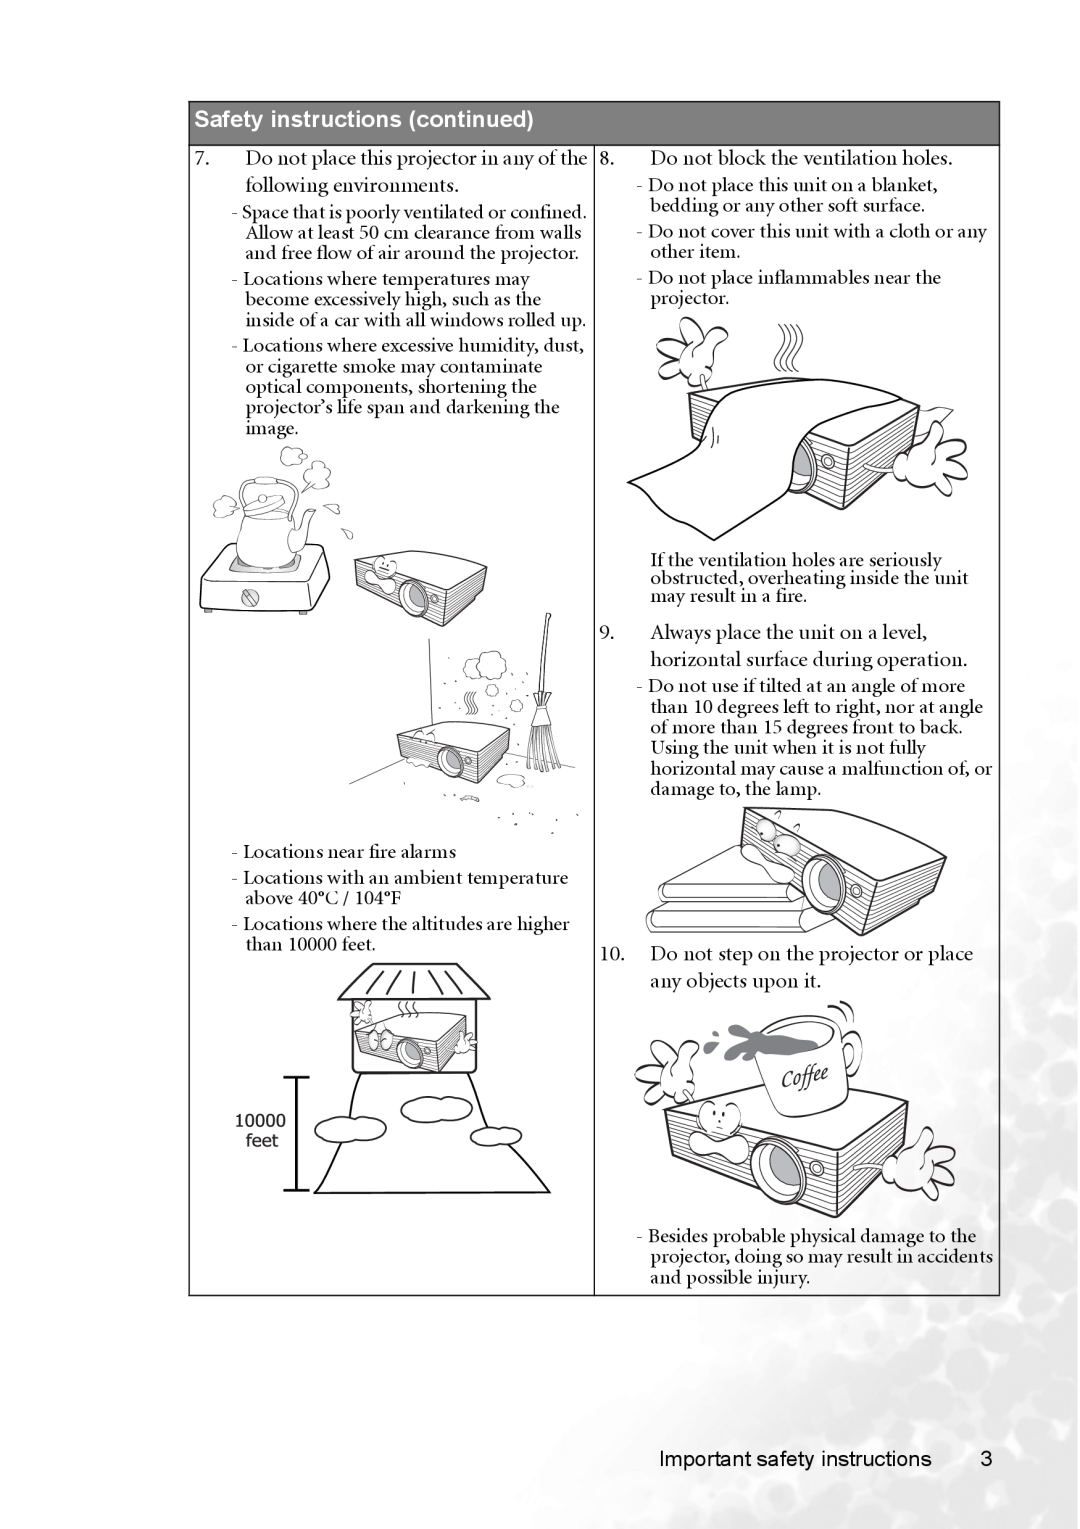 BenQ CP120 manual Safety instructions continued 